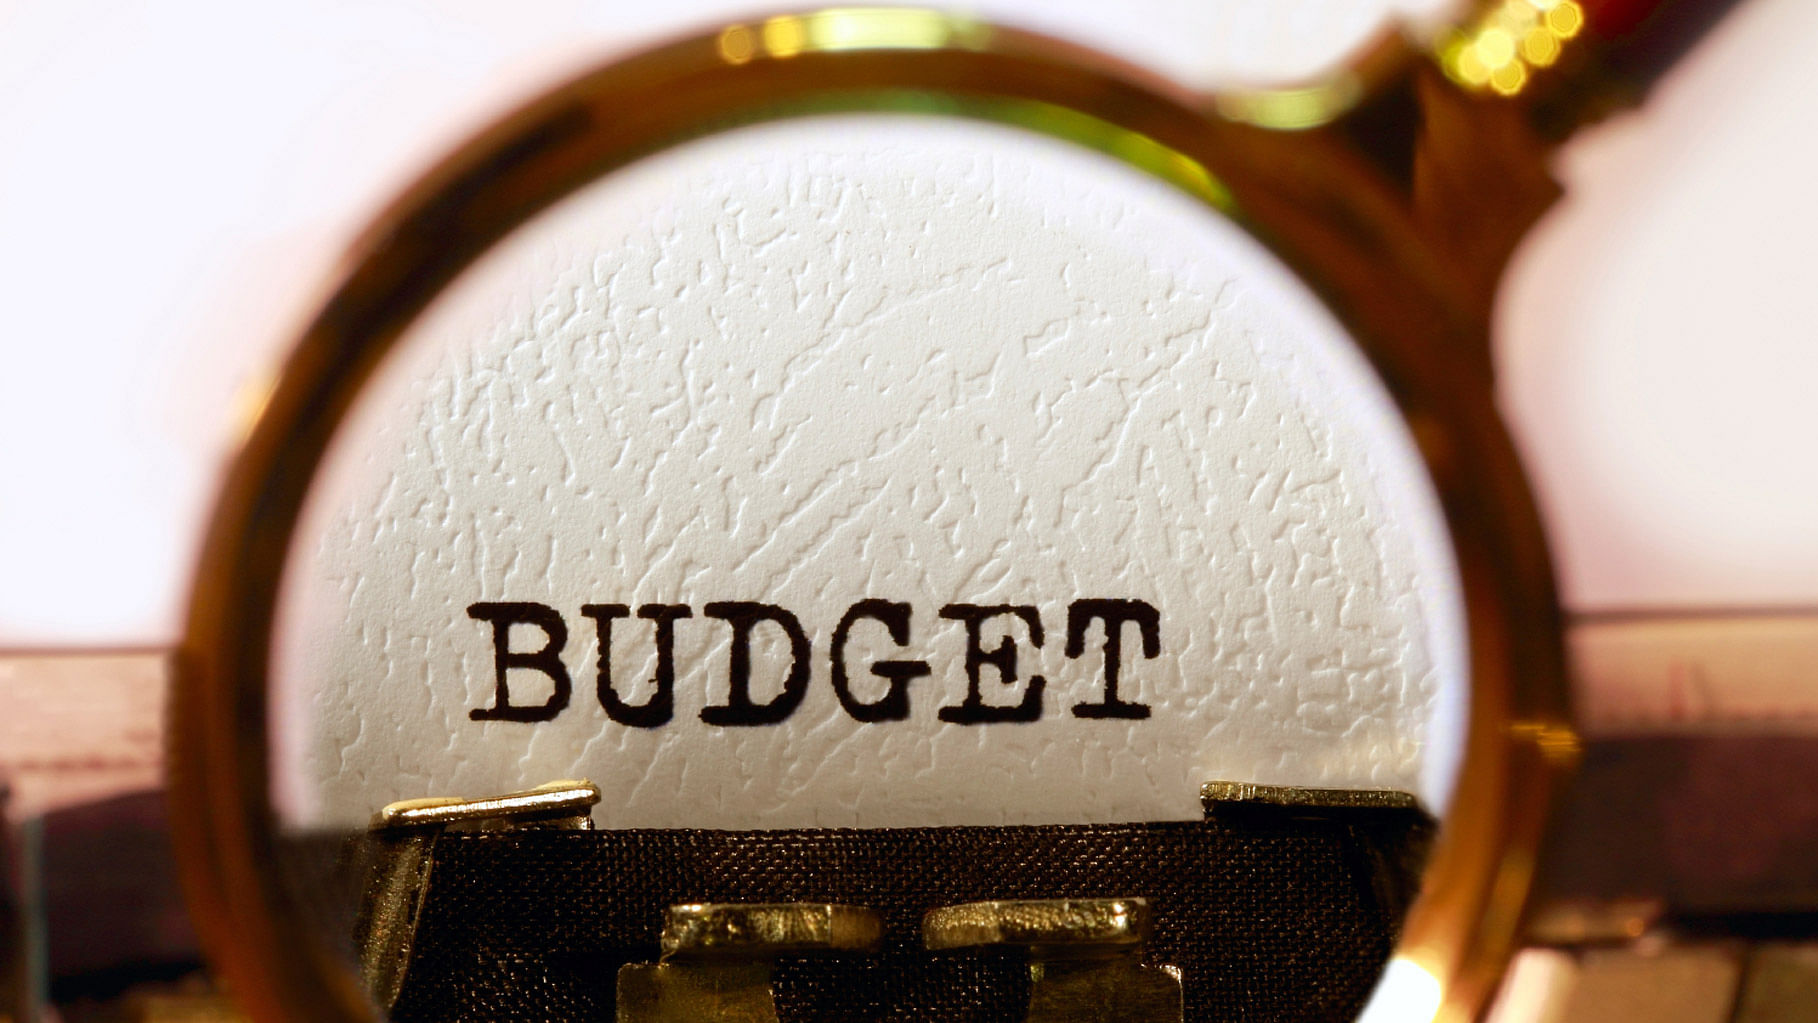 All eyes would be glued to the Union Budget due to be tabled on 29 February, as Finance Minister Arun Jaitley will present his third budget. (Photo: iStockphoto)